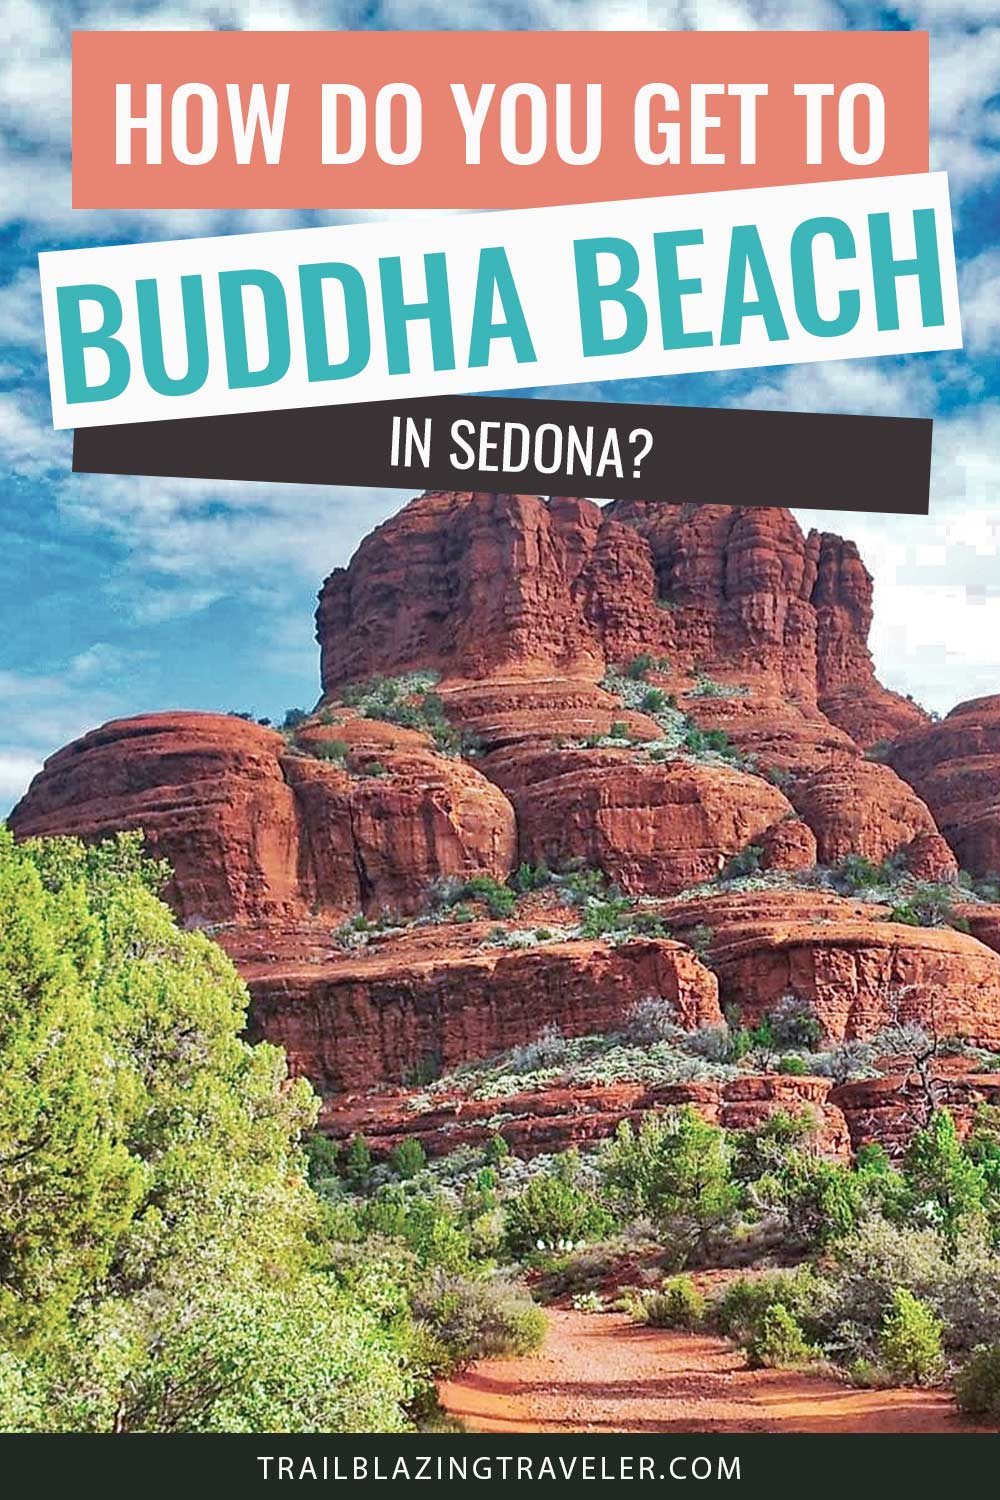 The Buddha Beach in Sedona - How do you get there?